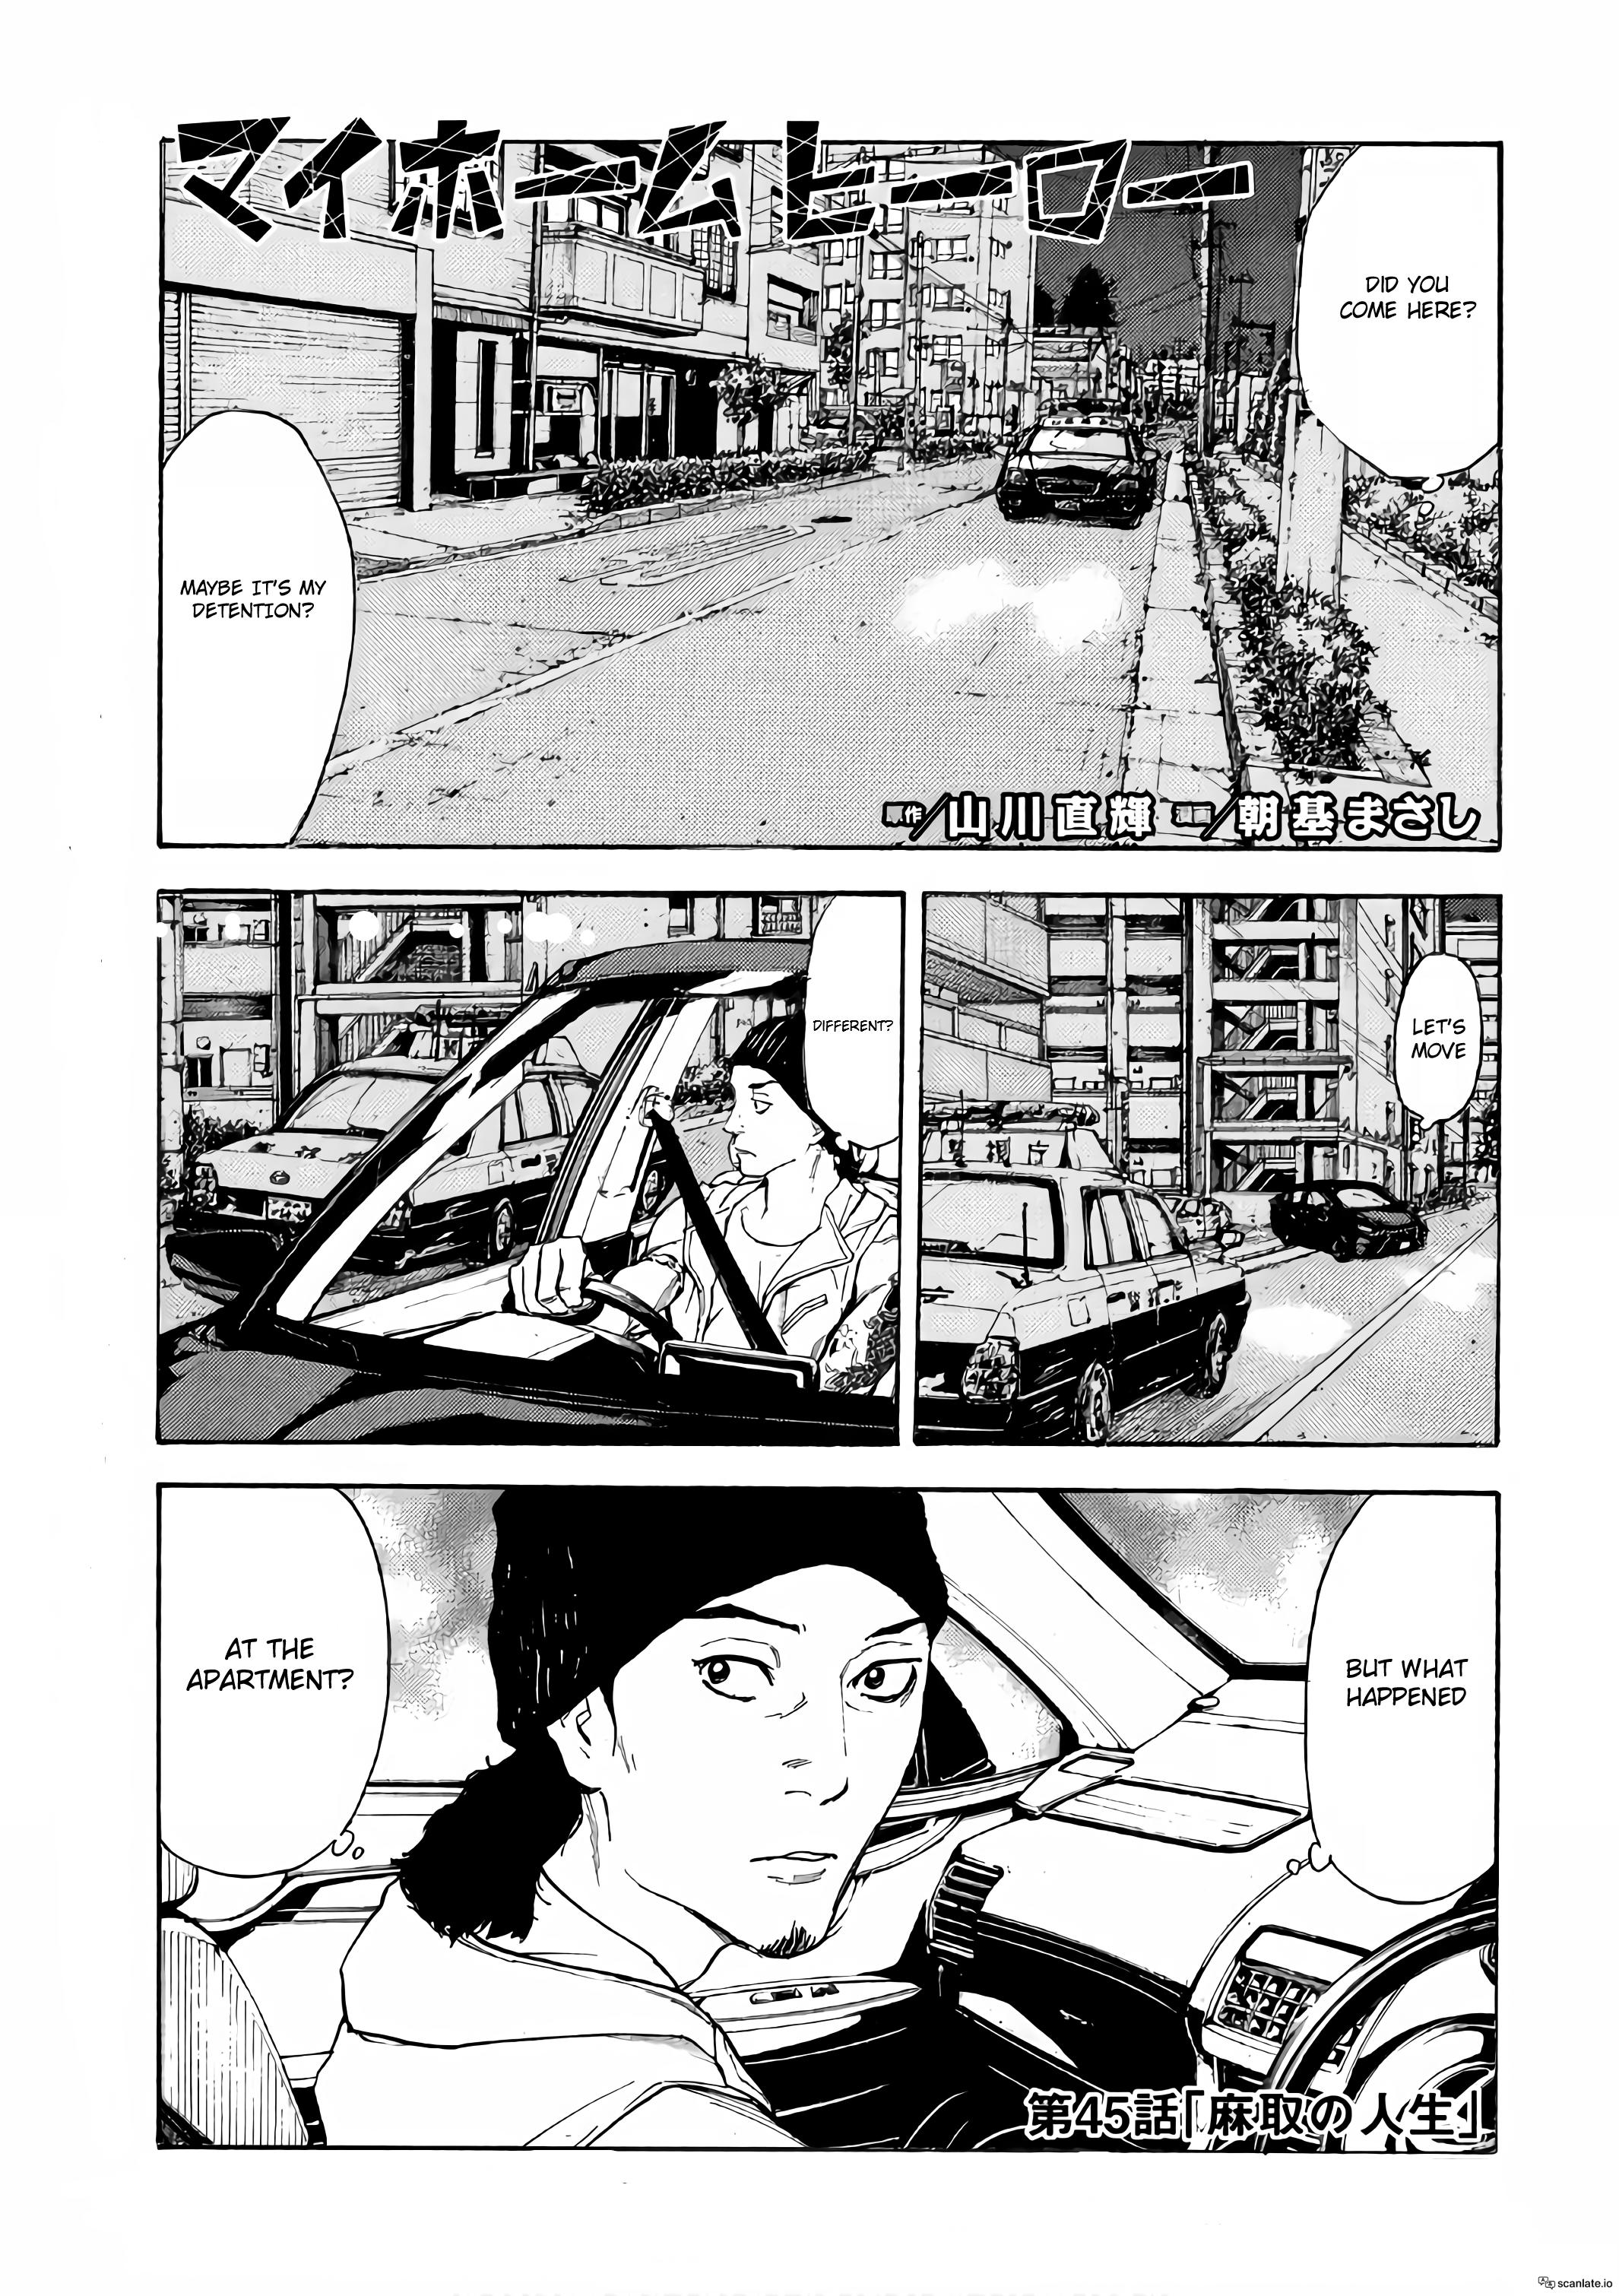 My Home Hero by Naoki - Cool Manga Panels or Pages I found